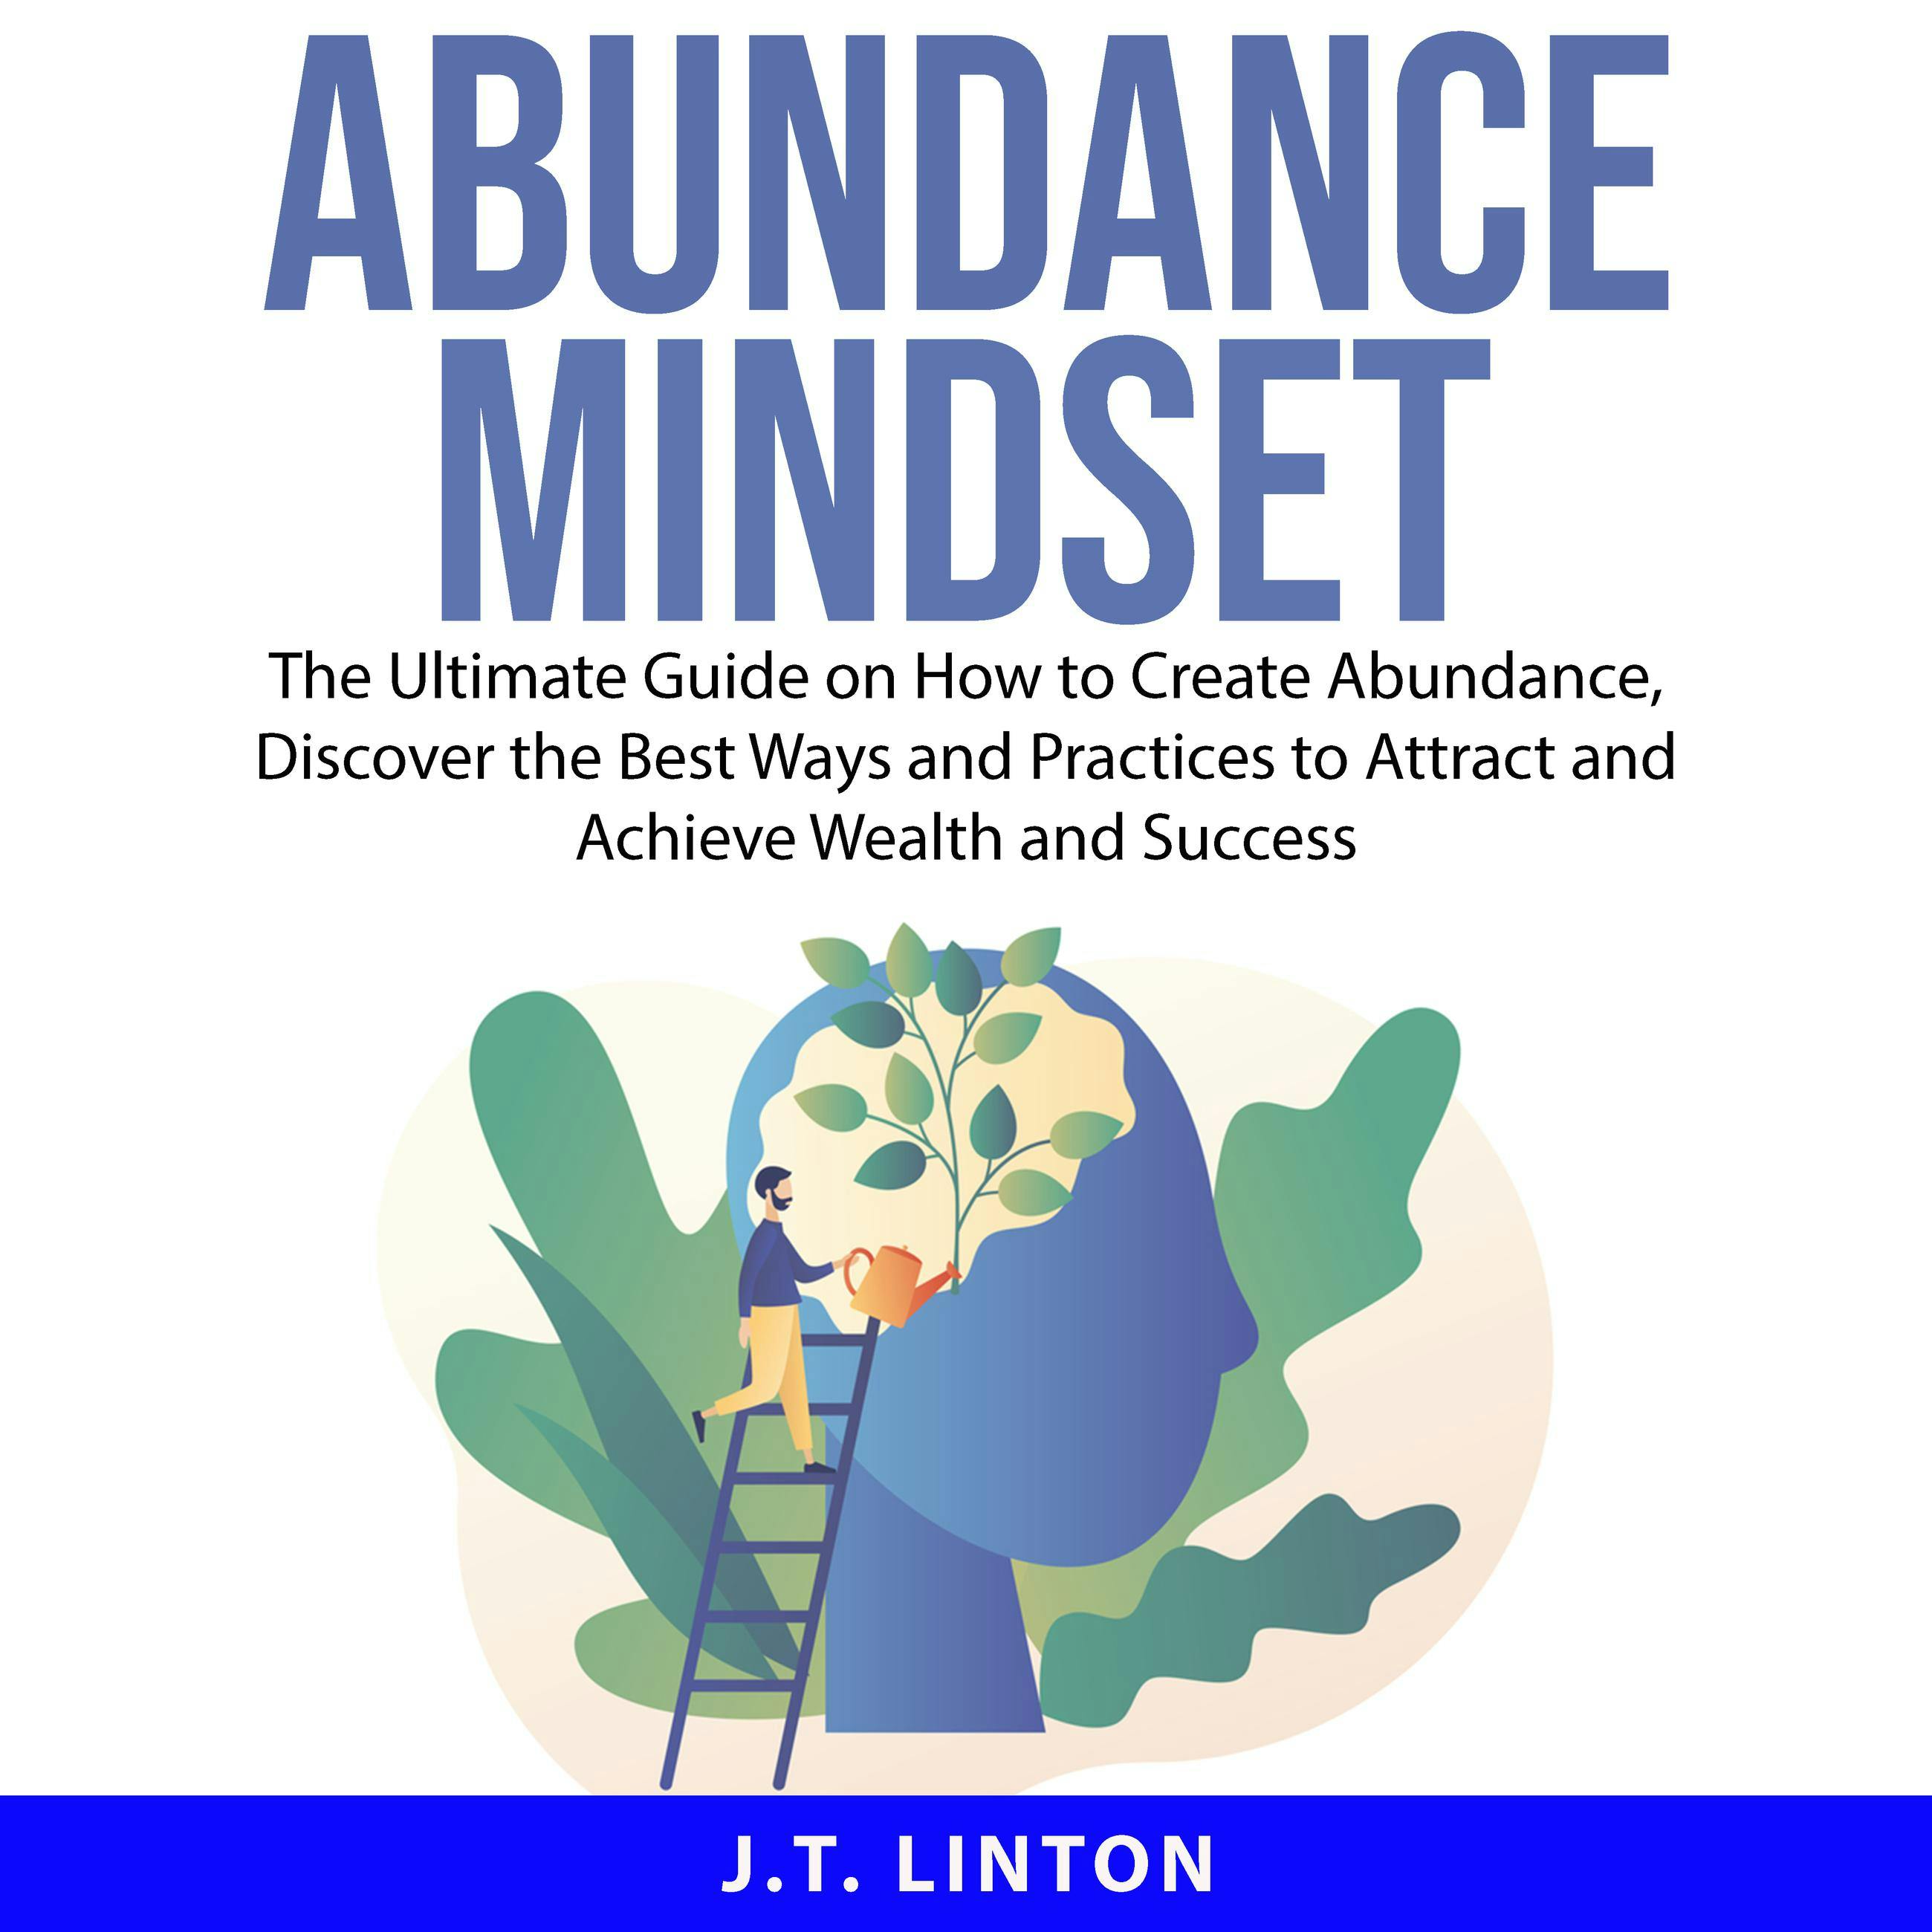 Abundance Mindset: The Ultimate Guide on How to Create Abundance, Discover the Best Ways and Practices to Attract and Achieve Wealth and Success - J.T. Linton